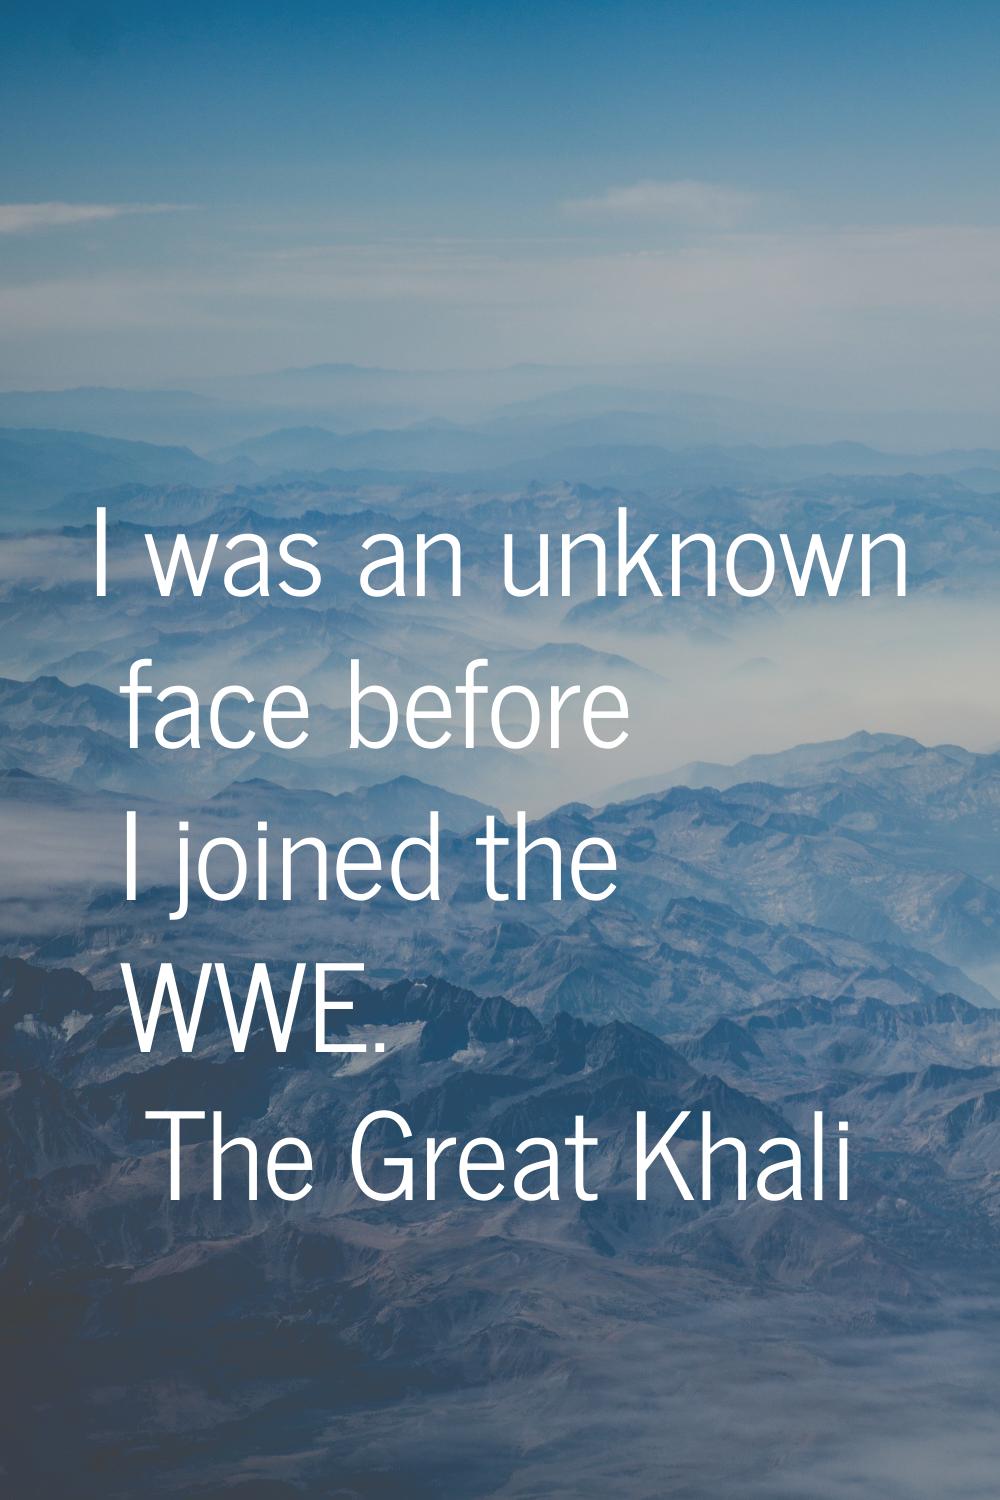 I was an unknown face before I joined the WWE.